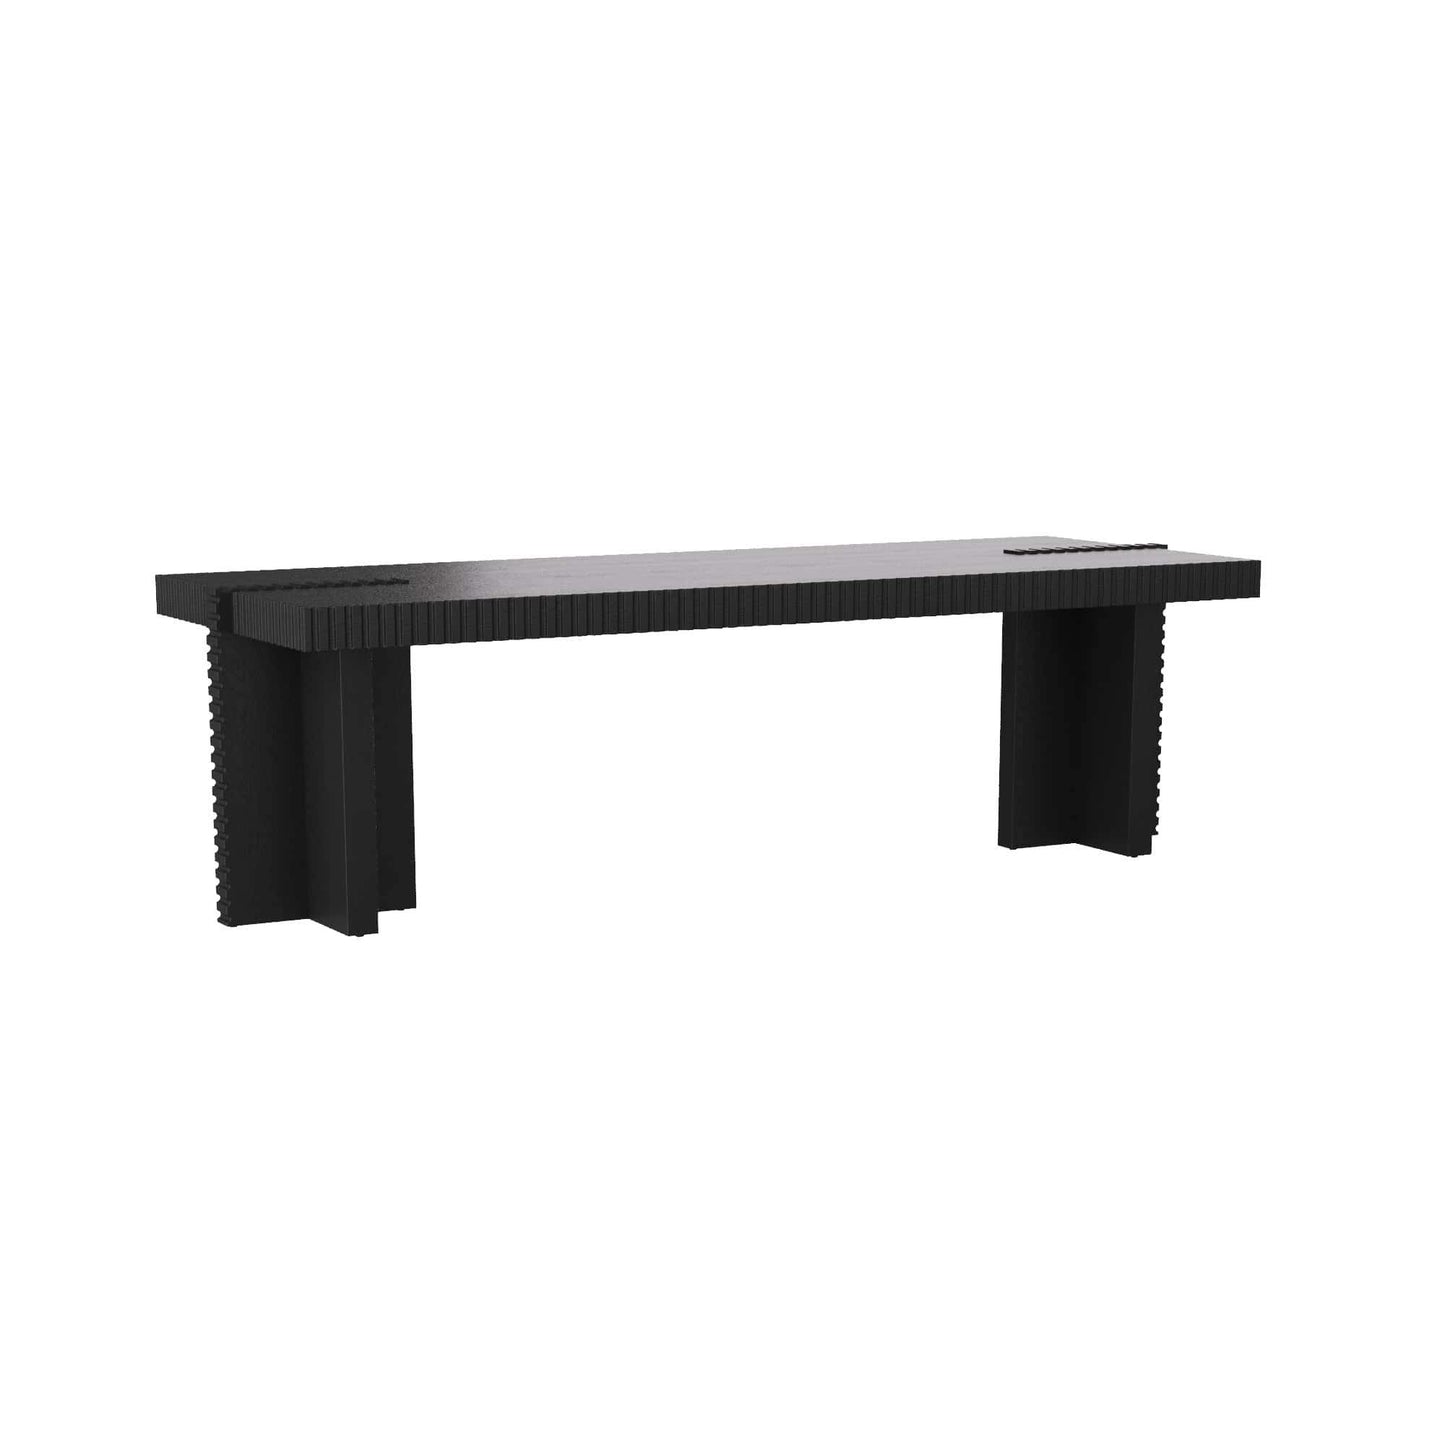 Industrial-Inspired Pacorro Bench in Ebony Finish - Carved Mango Wood with Textural Detailing